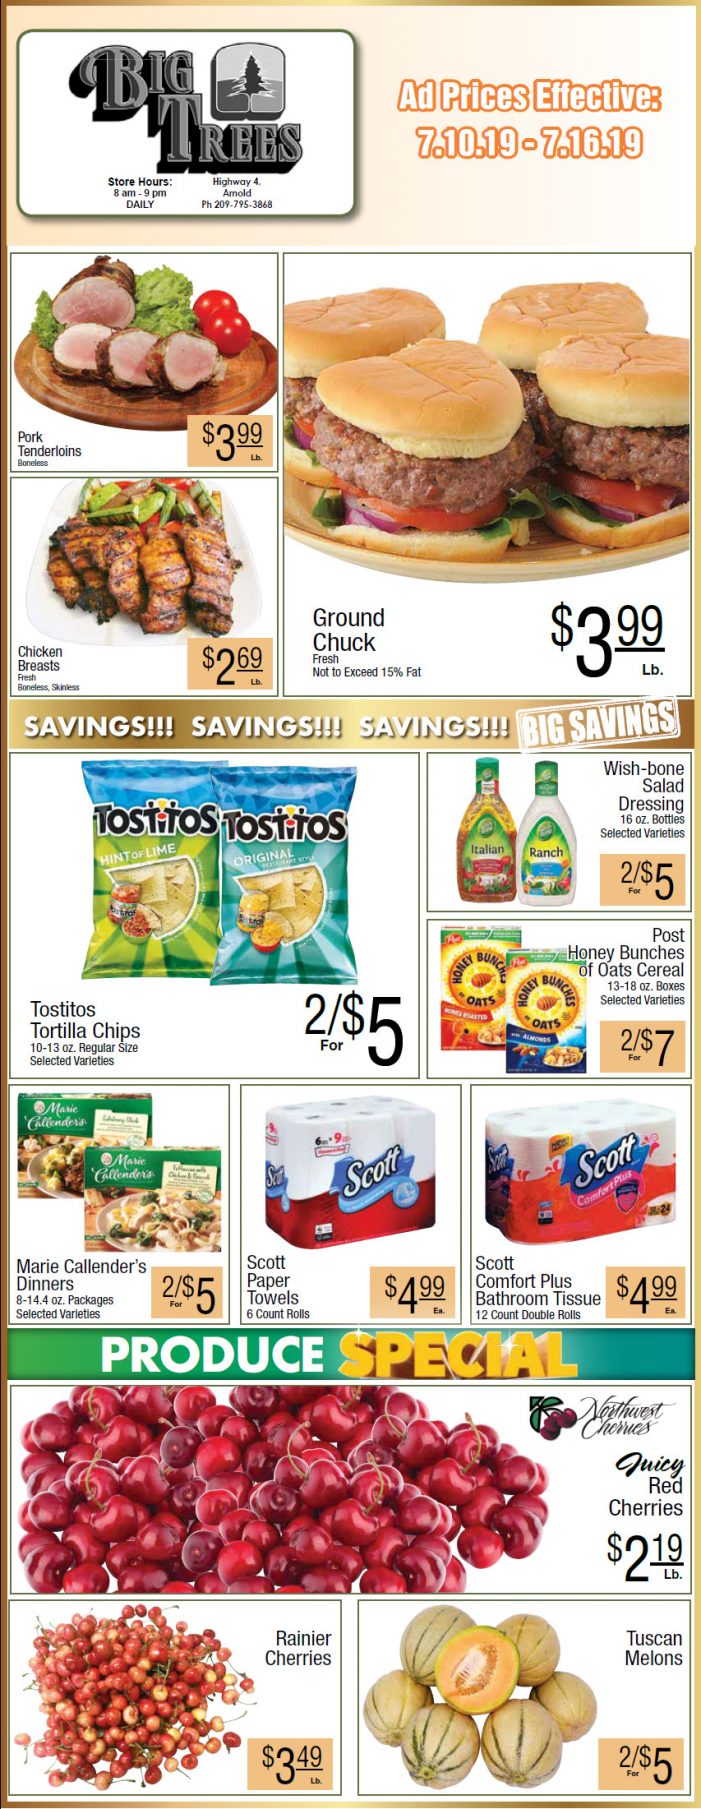 Big Trees Market Weekly Ad & Grocery Specials Through July 16th